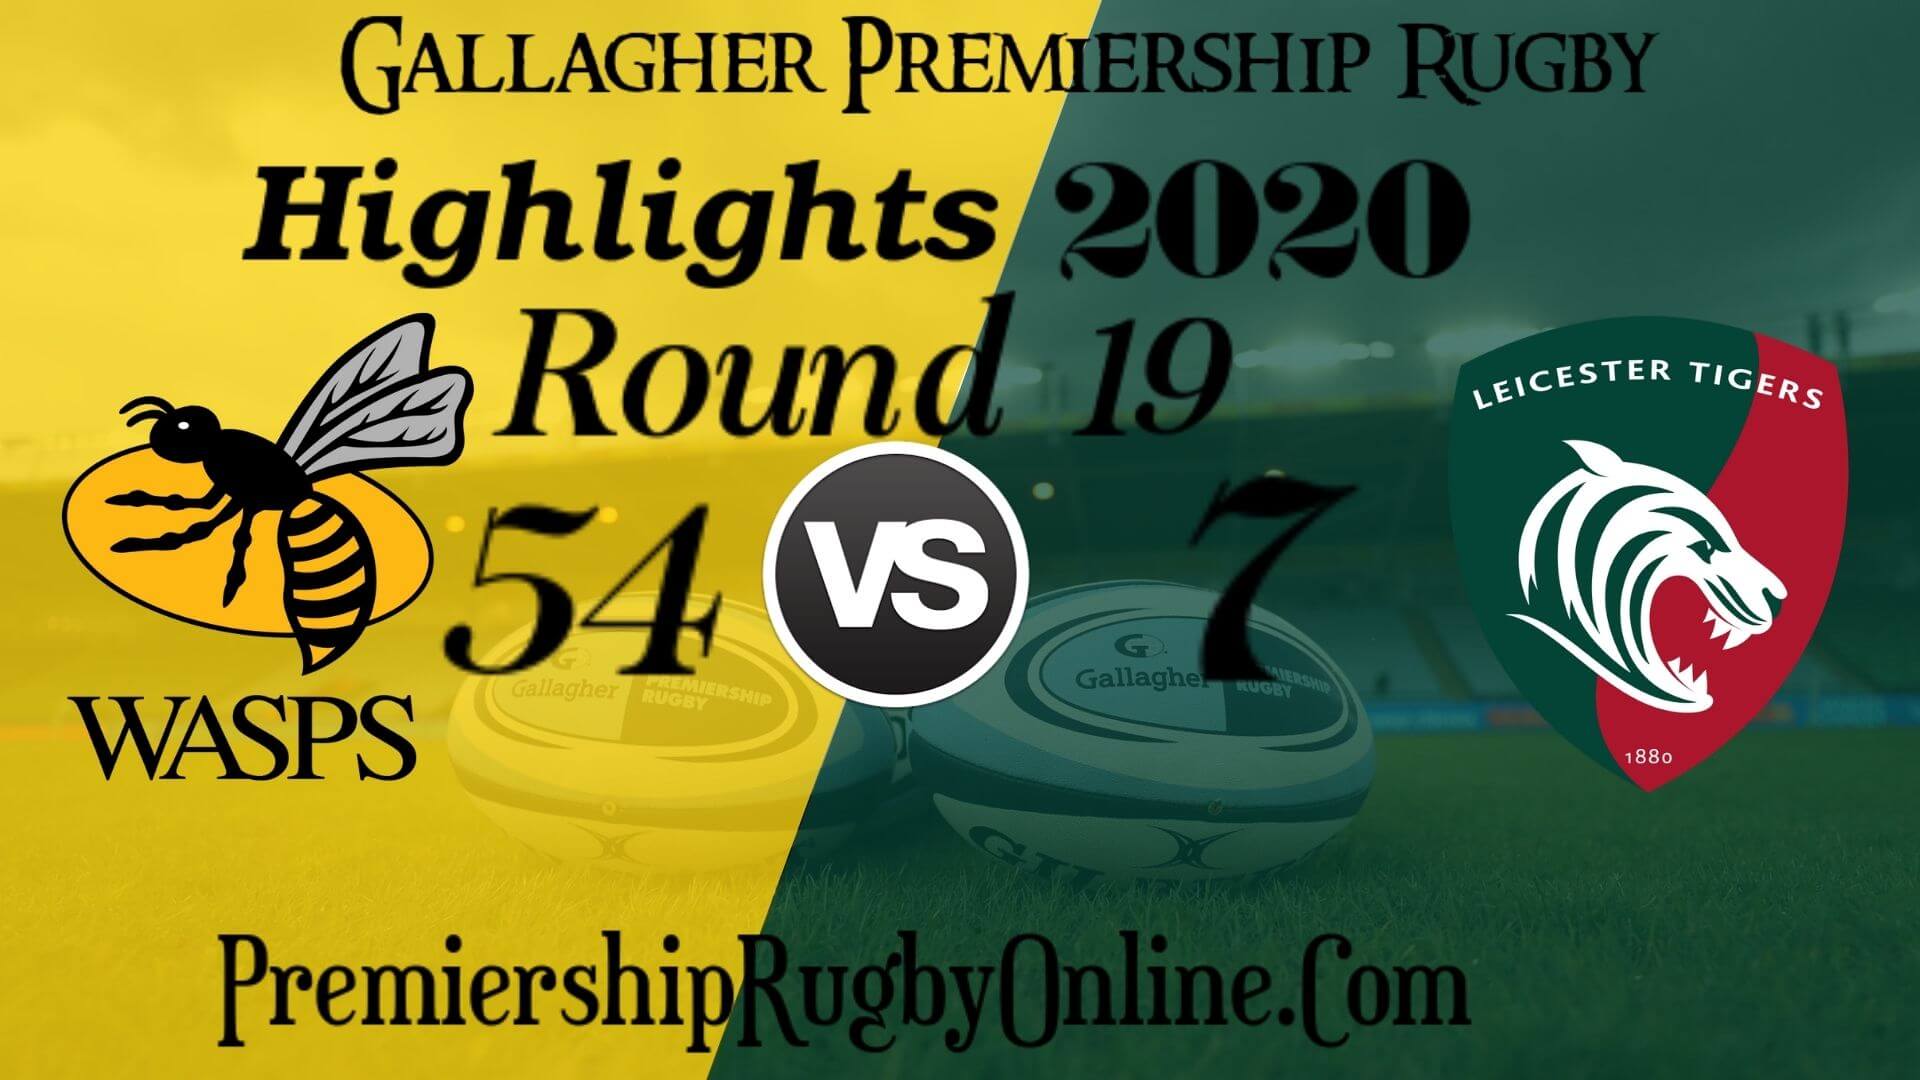 Wasps vs Leicester Tigers Highlights 2020 RD 19